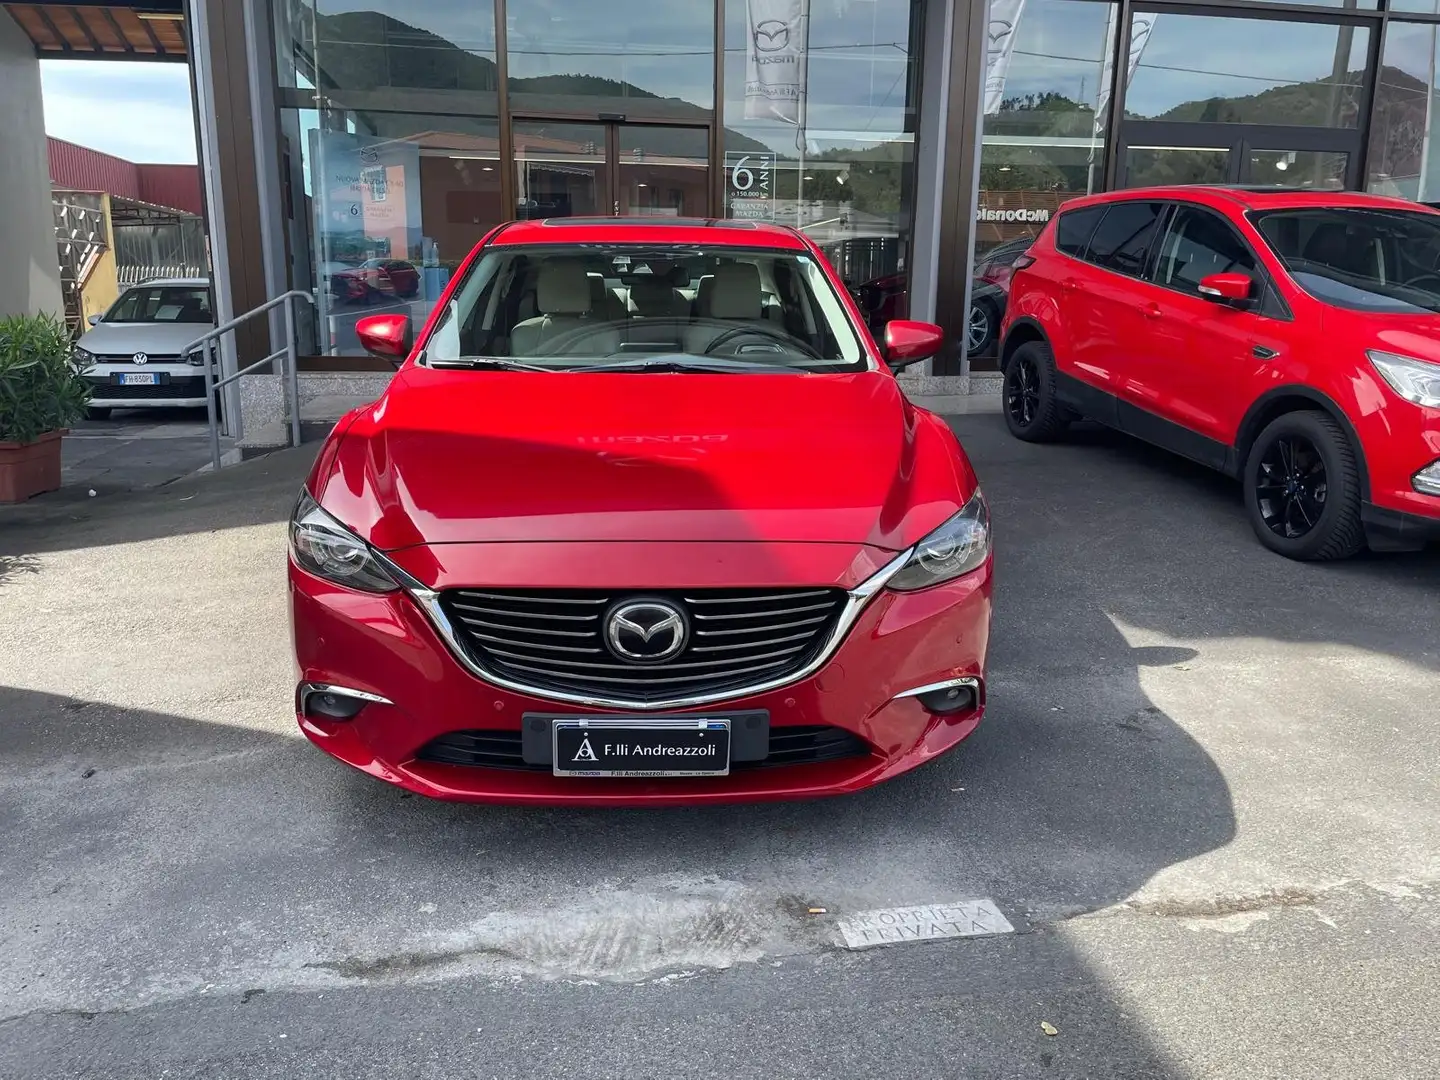 Mazda 6 6 2.2 Exceed 175cv 6at Rosso - 2